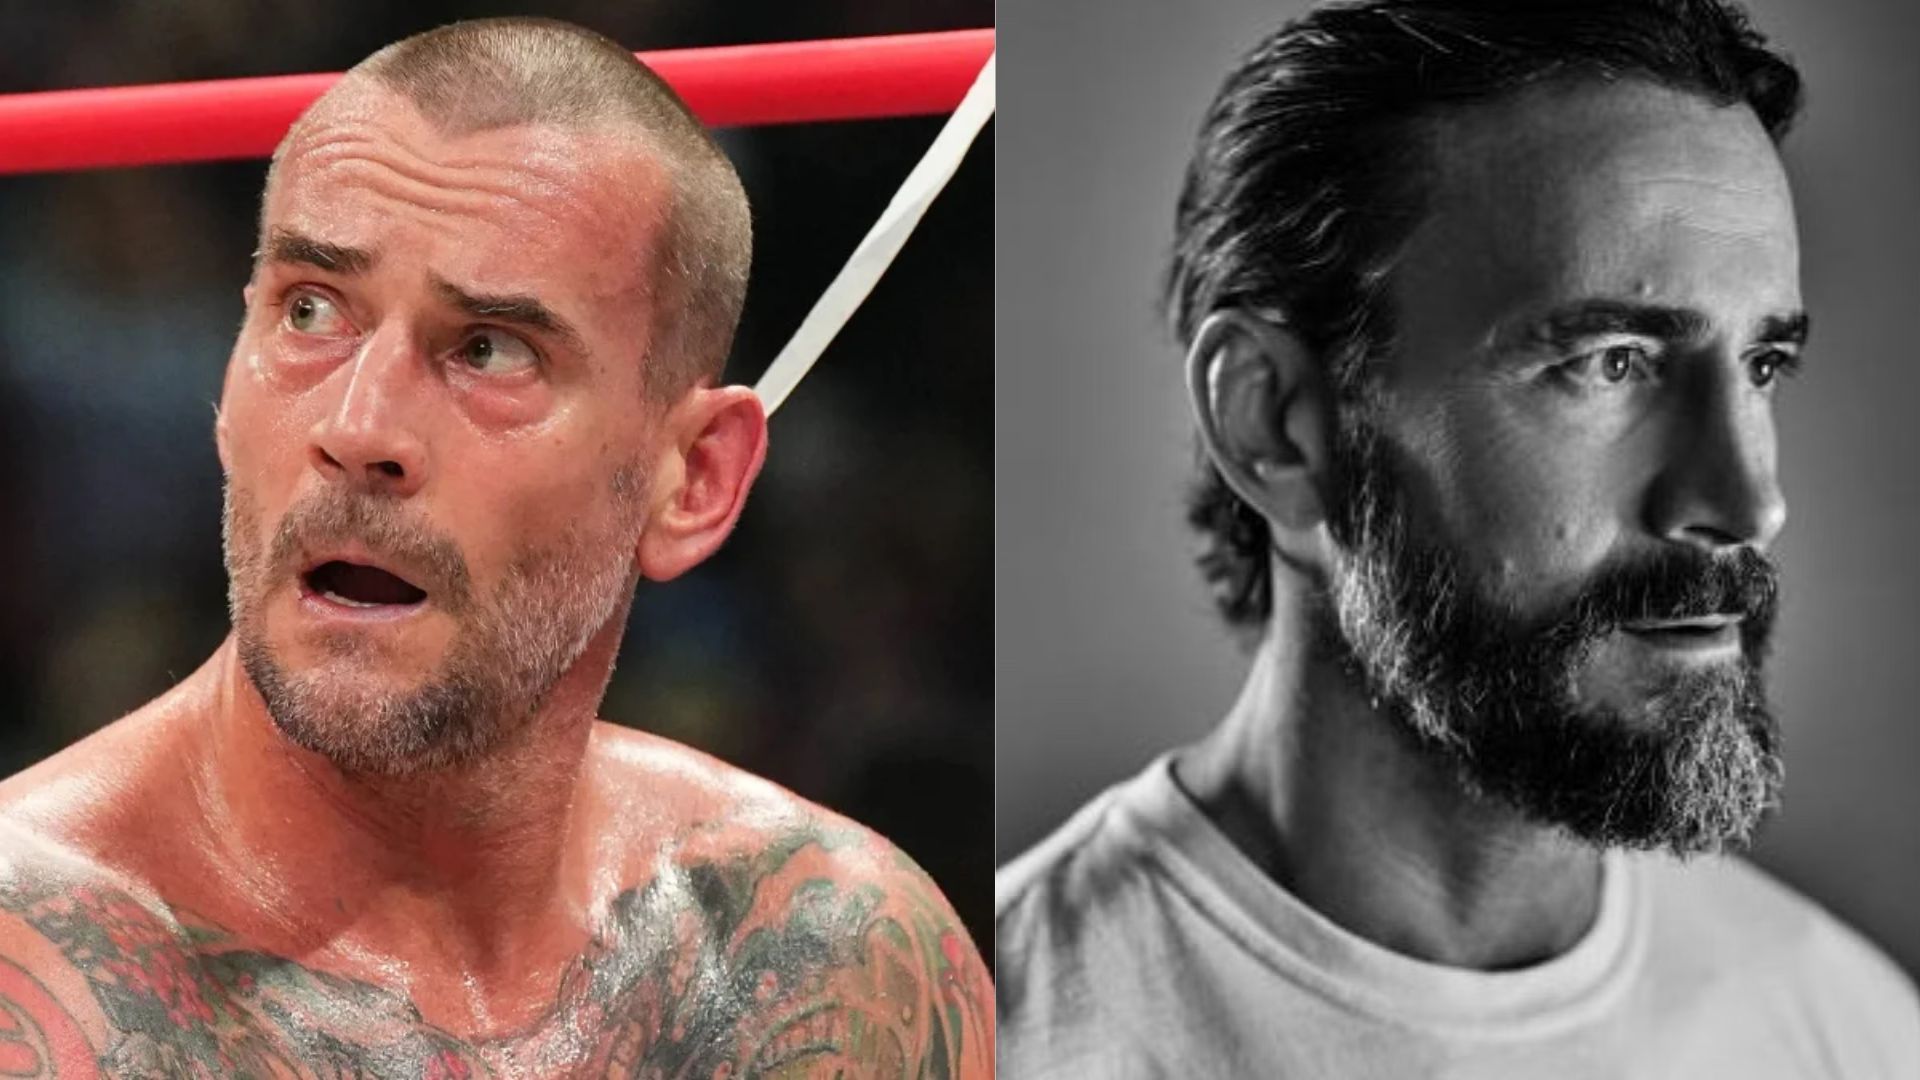 BREAKING: CM Punk has been fired from AEW!